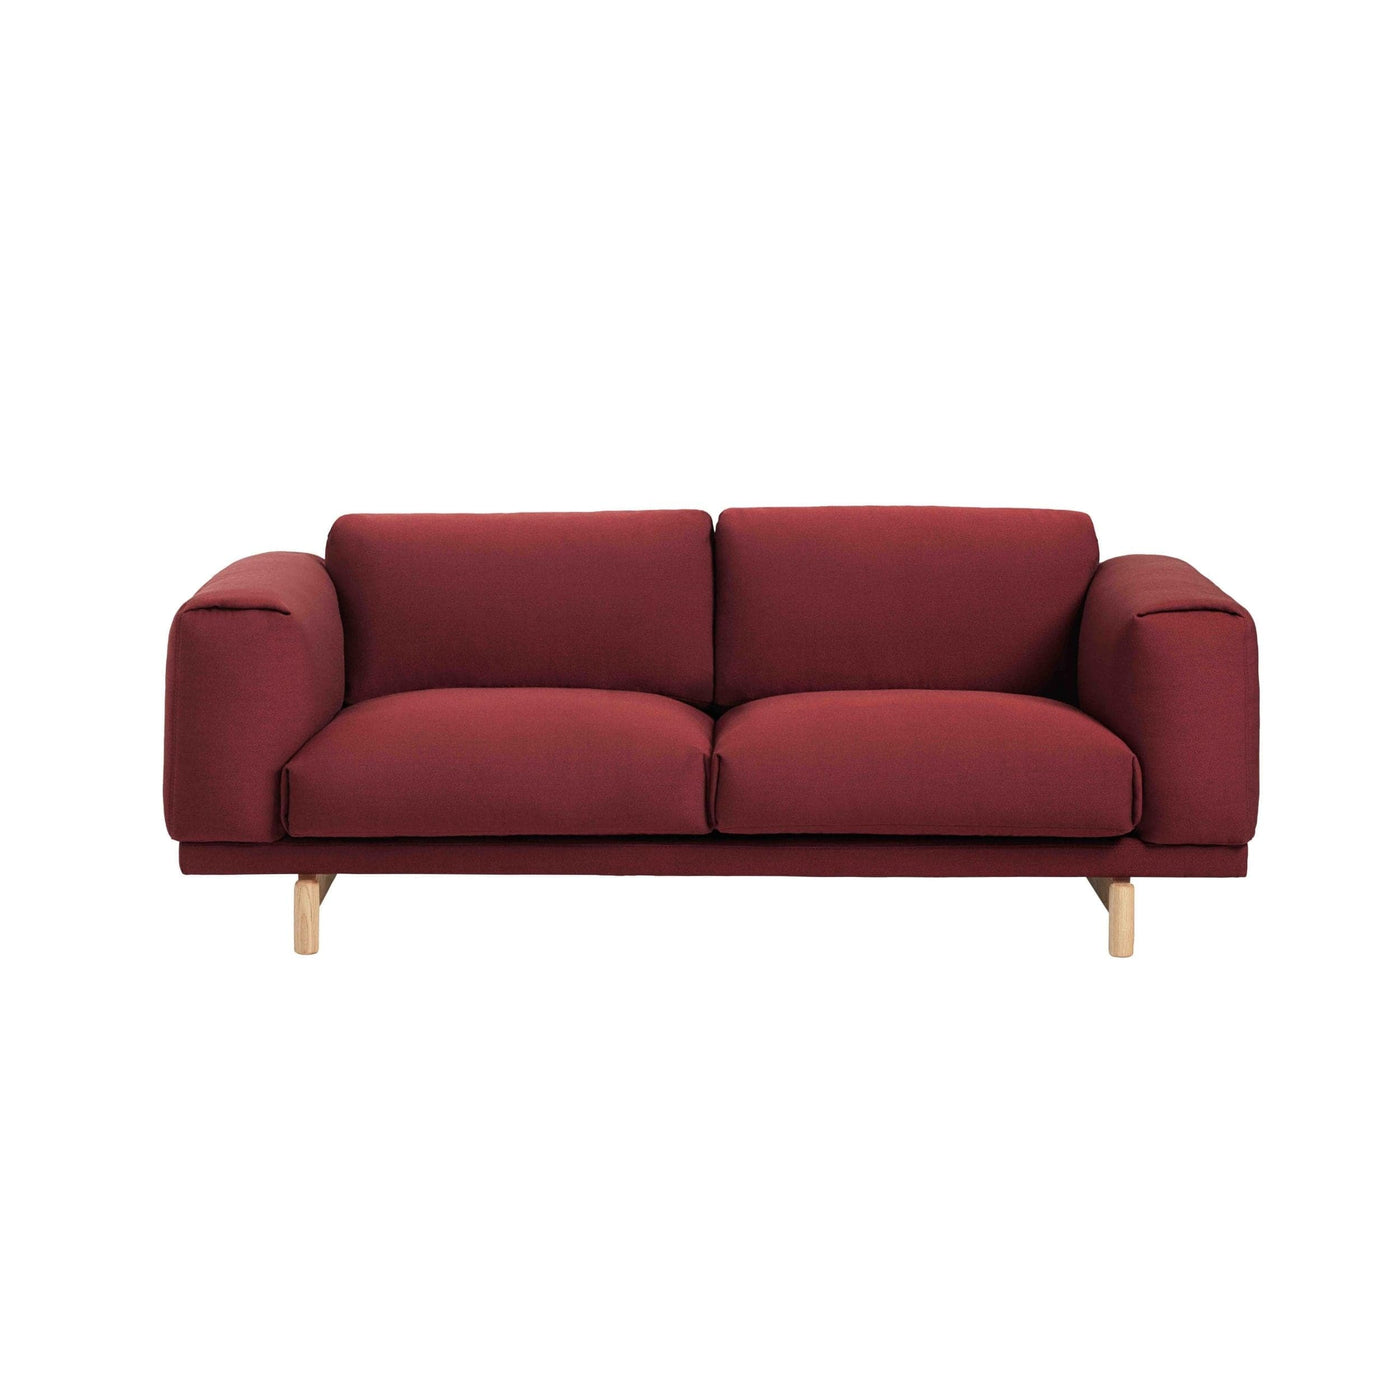 Muuto Rest 2 Seater Sofa in rime 591  fabric. Made to order from someday designs. #colour_rime-591